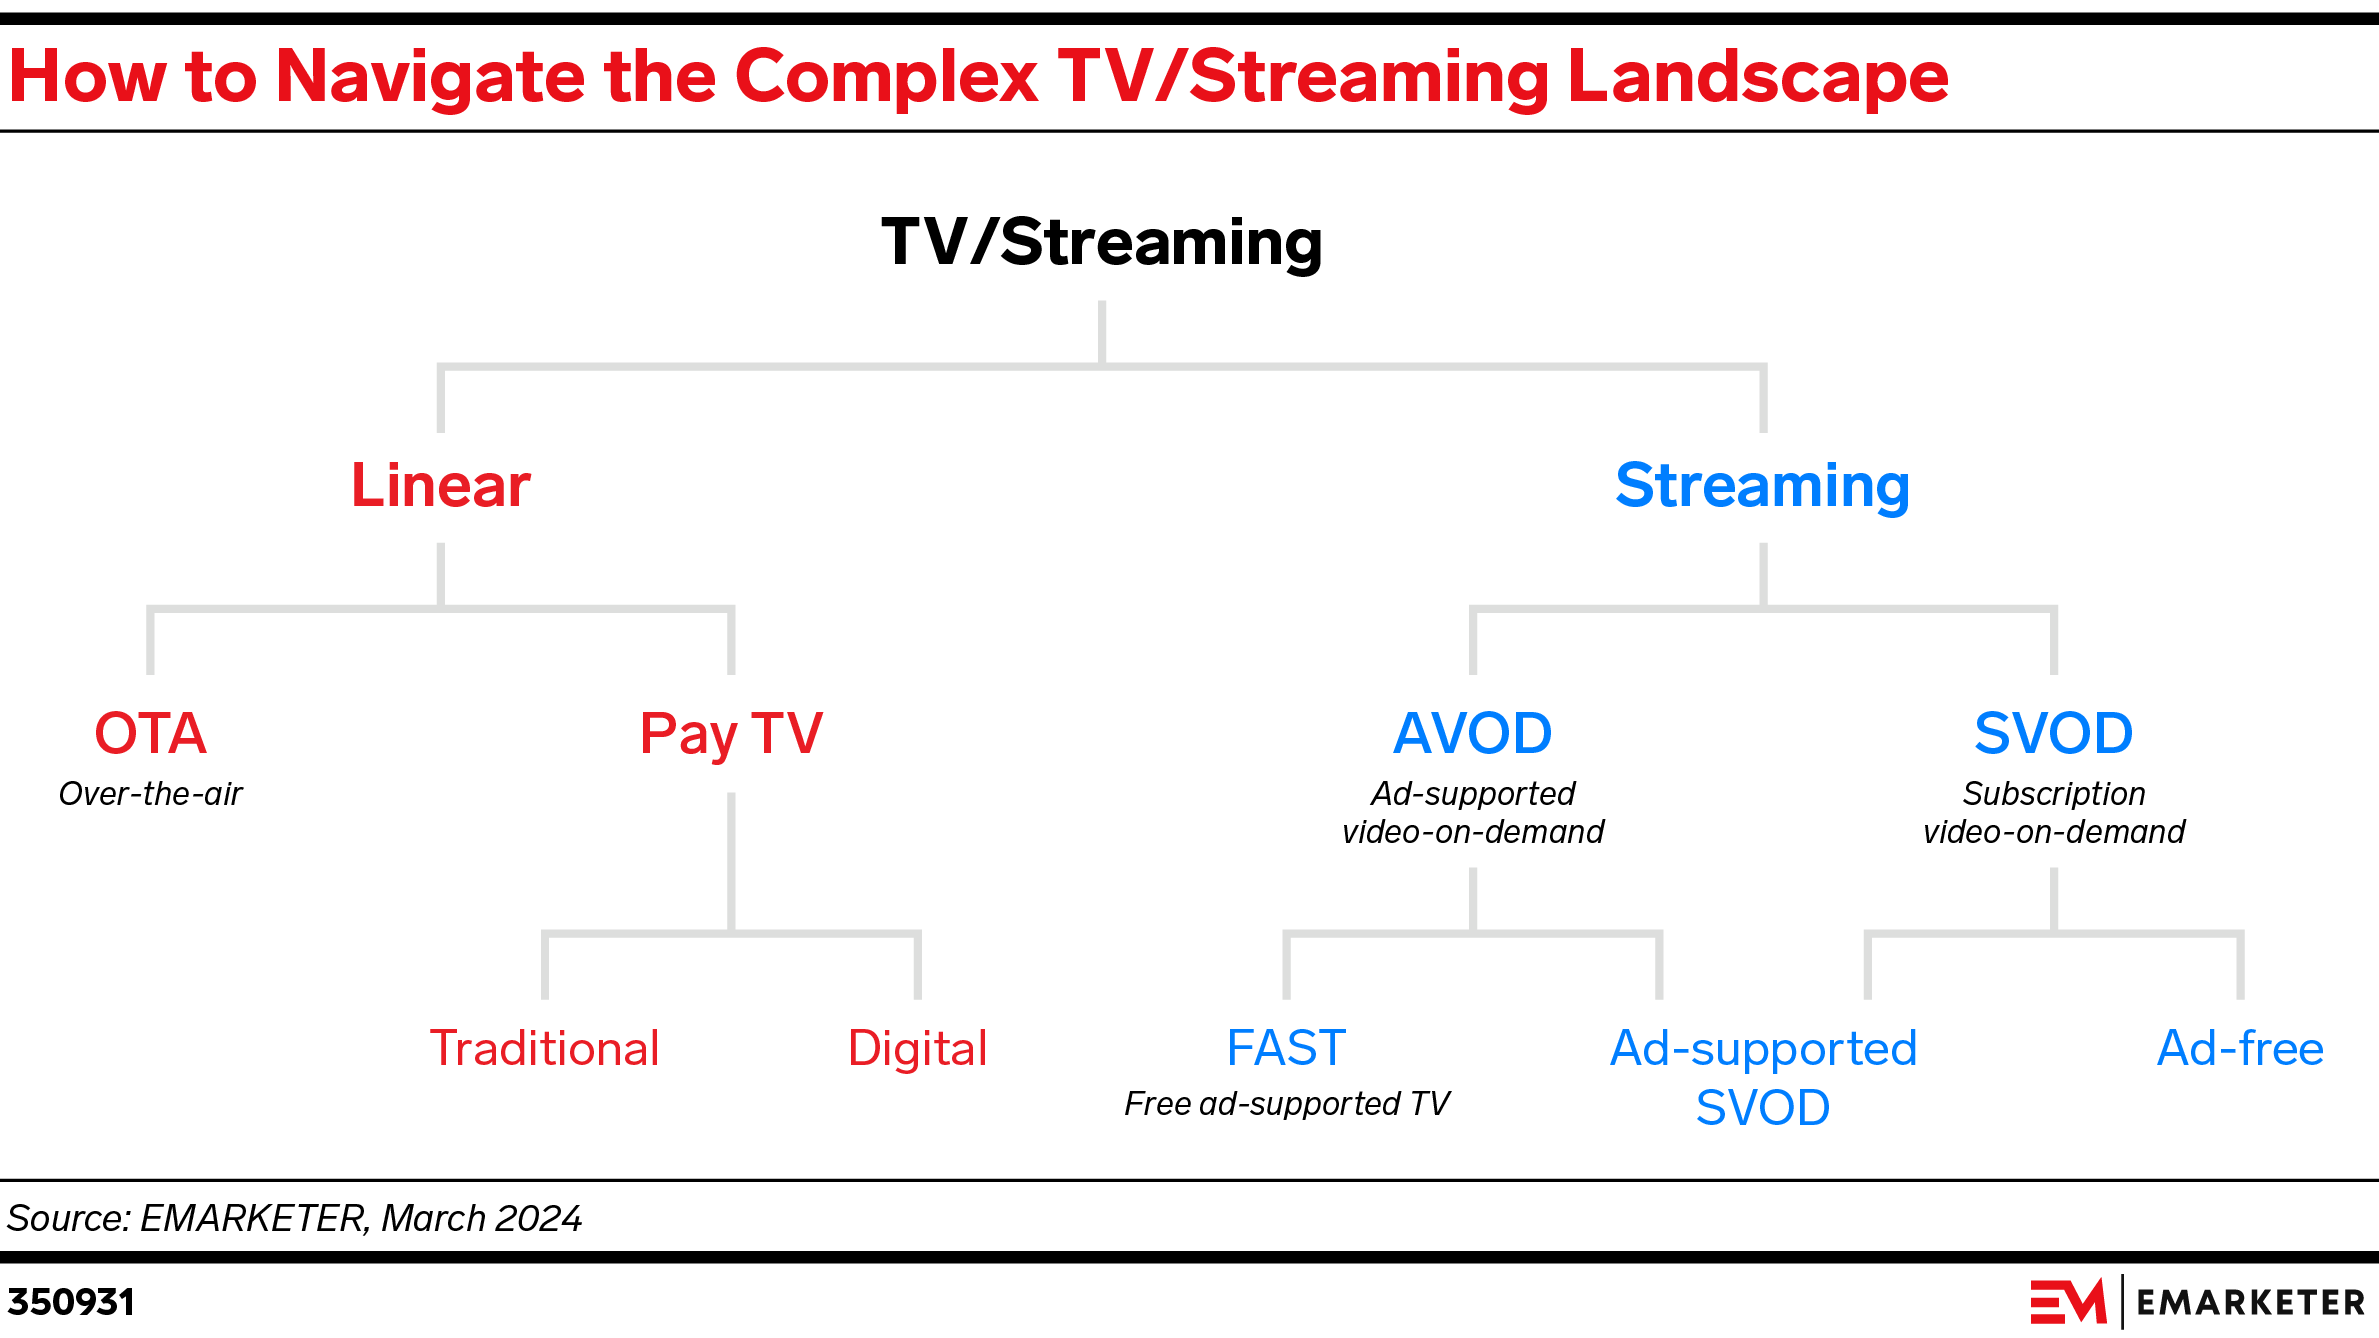 How to Navigate the Complex TV/Streaming Landscape